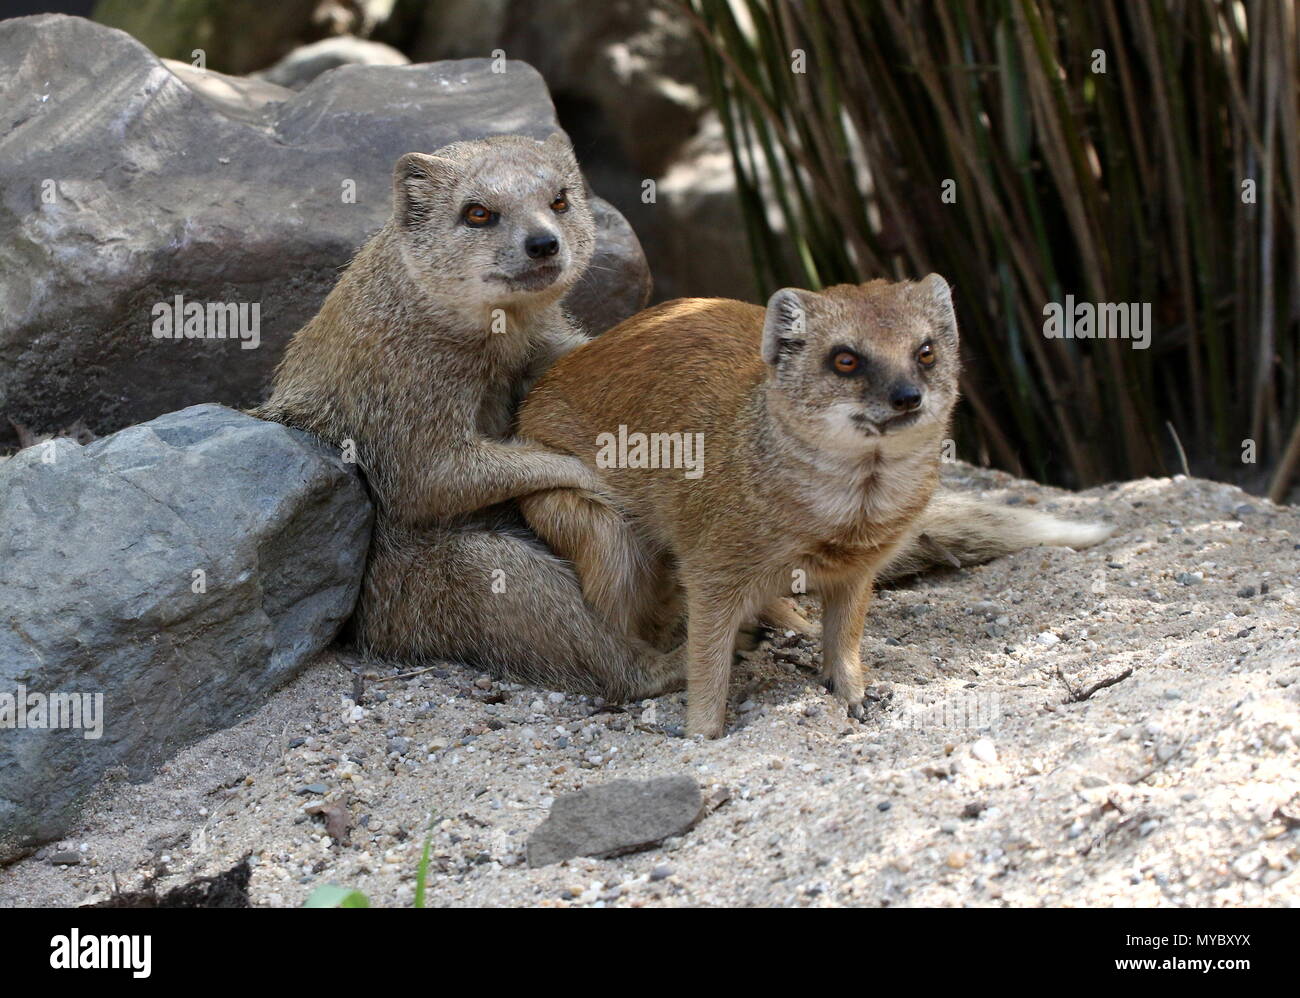 Mating male and female South African Yellow mongooses (Cynictis penicillata) a.k.a. Red Meerkat Stock Photo